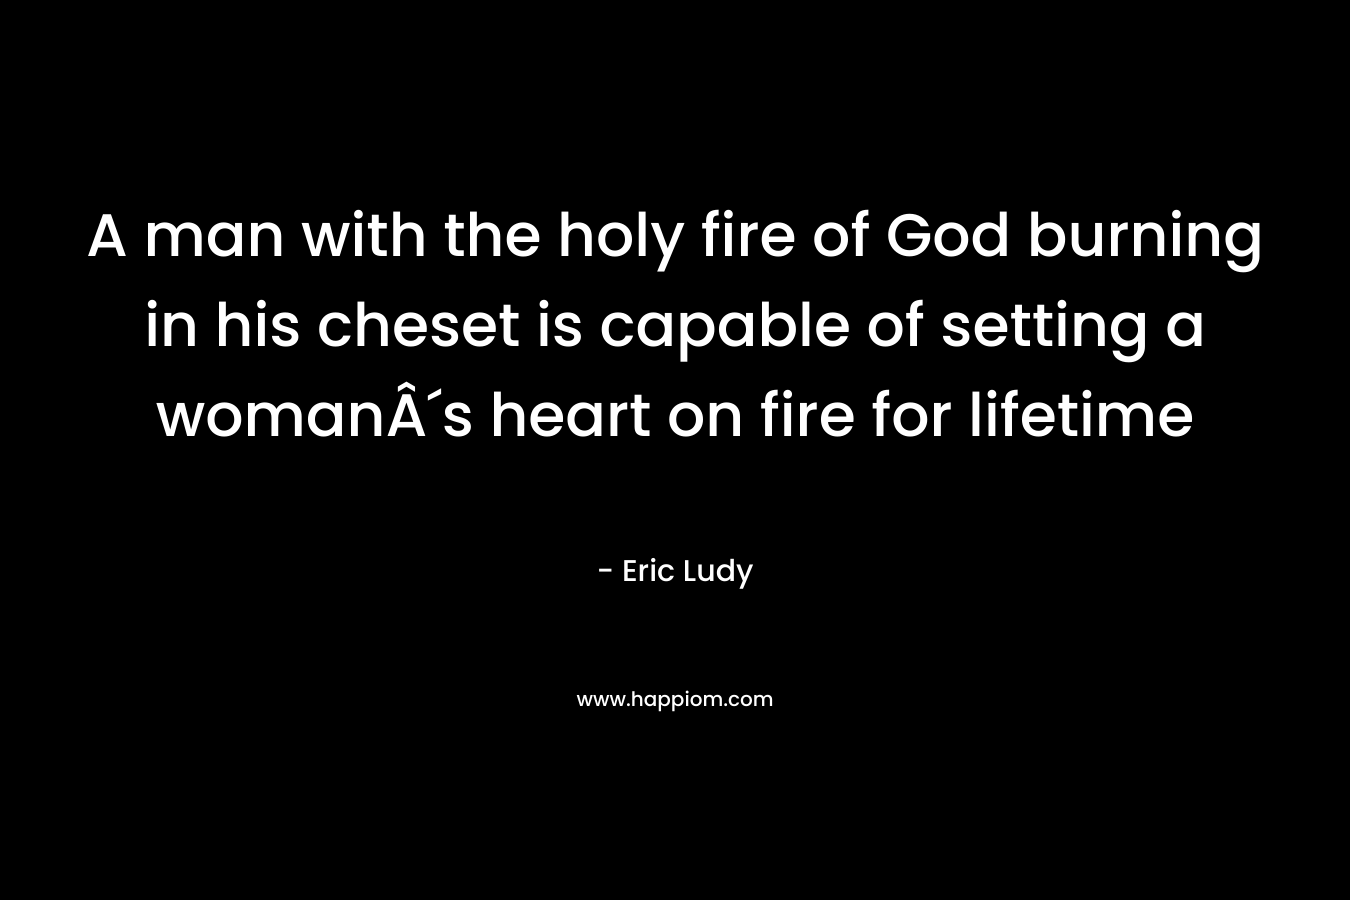 A man with the holy fire of God burning in his cheset is capable of setting a womanÂ´s heart on fire for lifetime